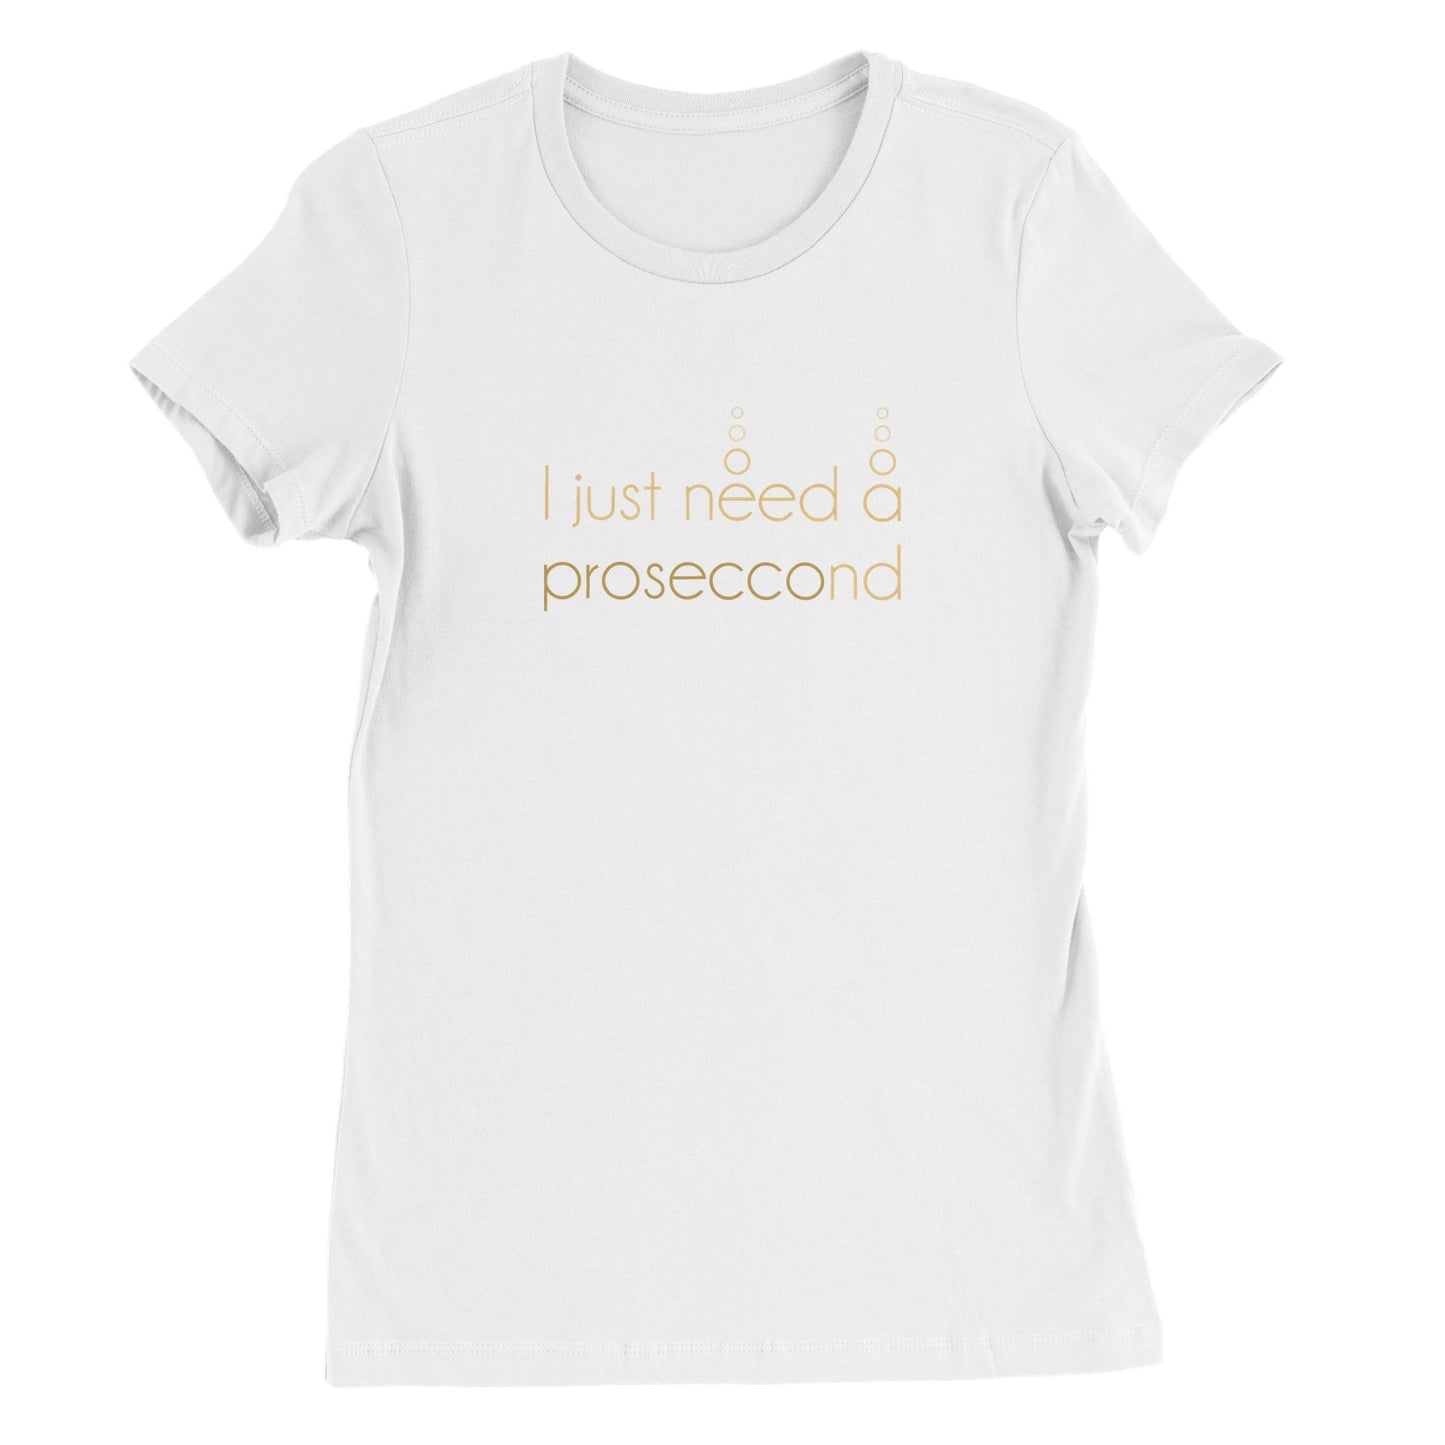 I JUST NEED A PROSECCOND | WOMENS T-SHIRT